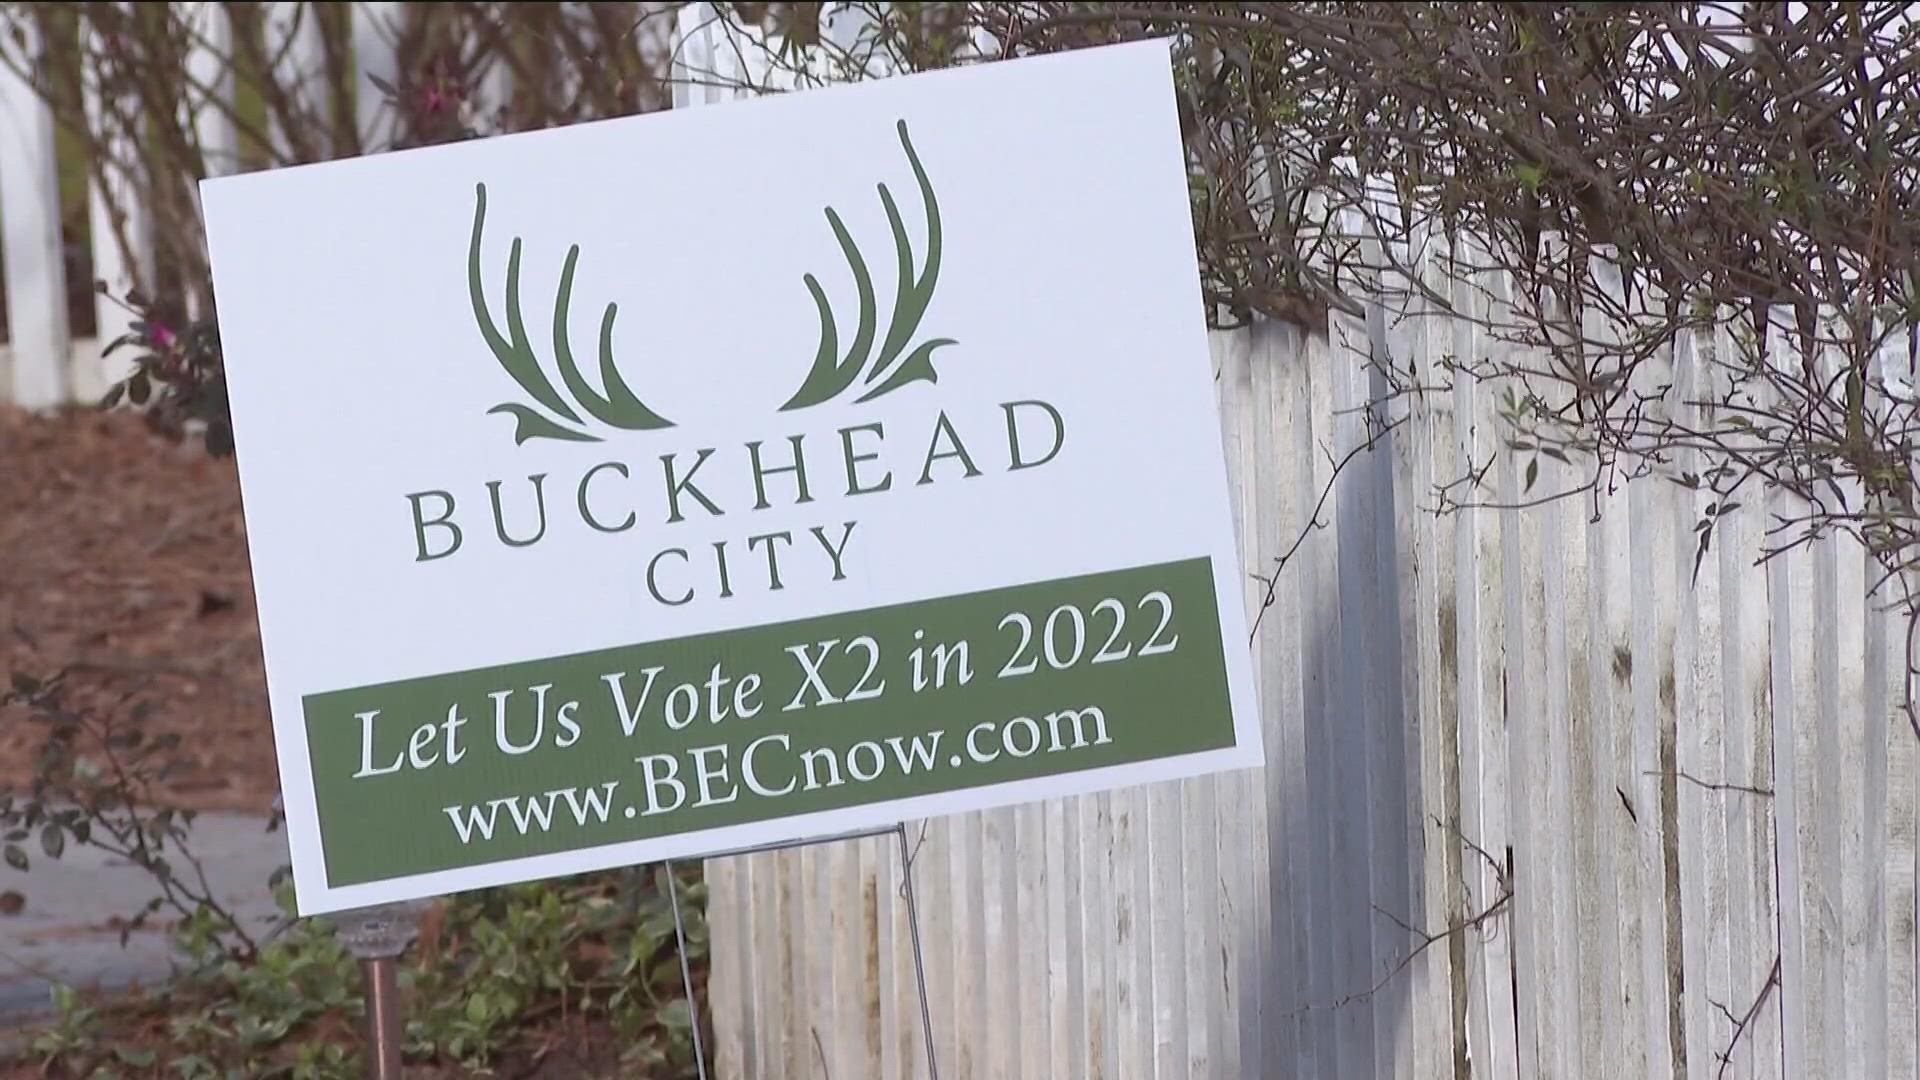 The bill, part of the effort to create a new Buckhead City from portions of northern Atlanta, was questioned by several groups, including Gov. Kemp